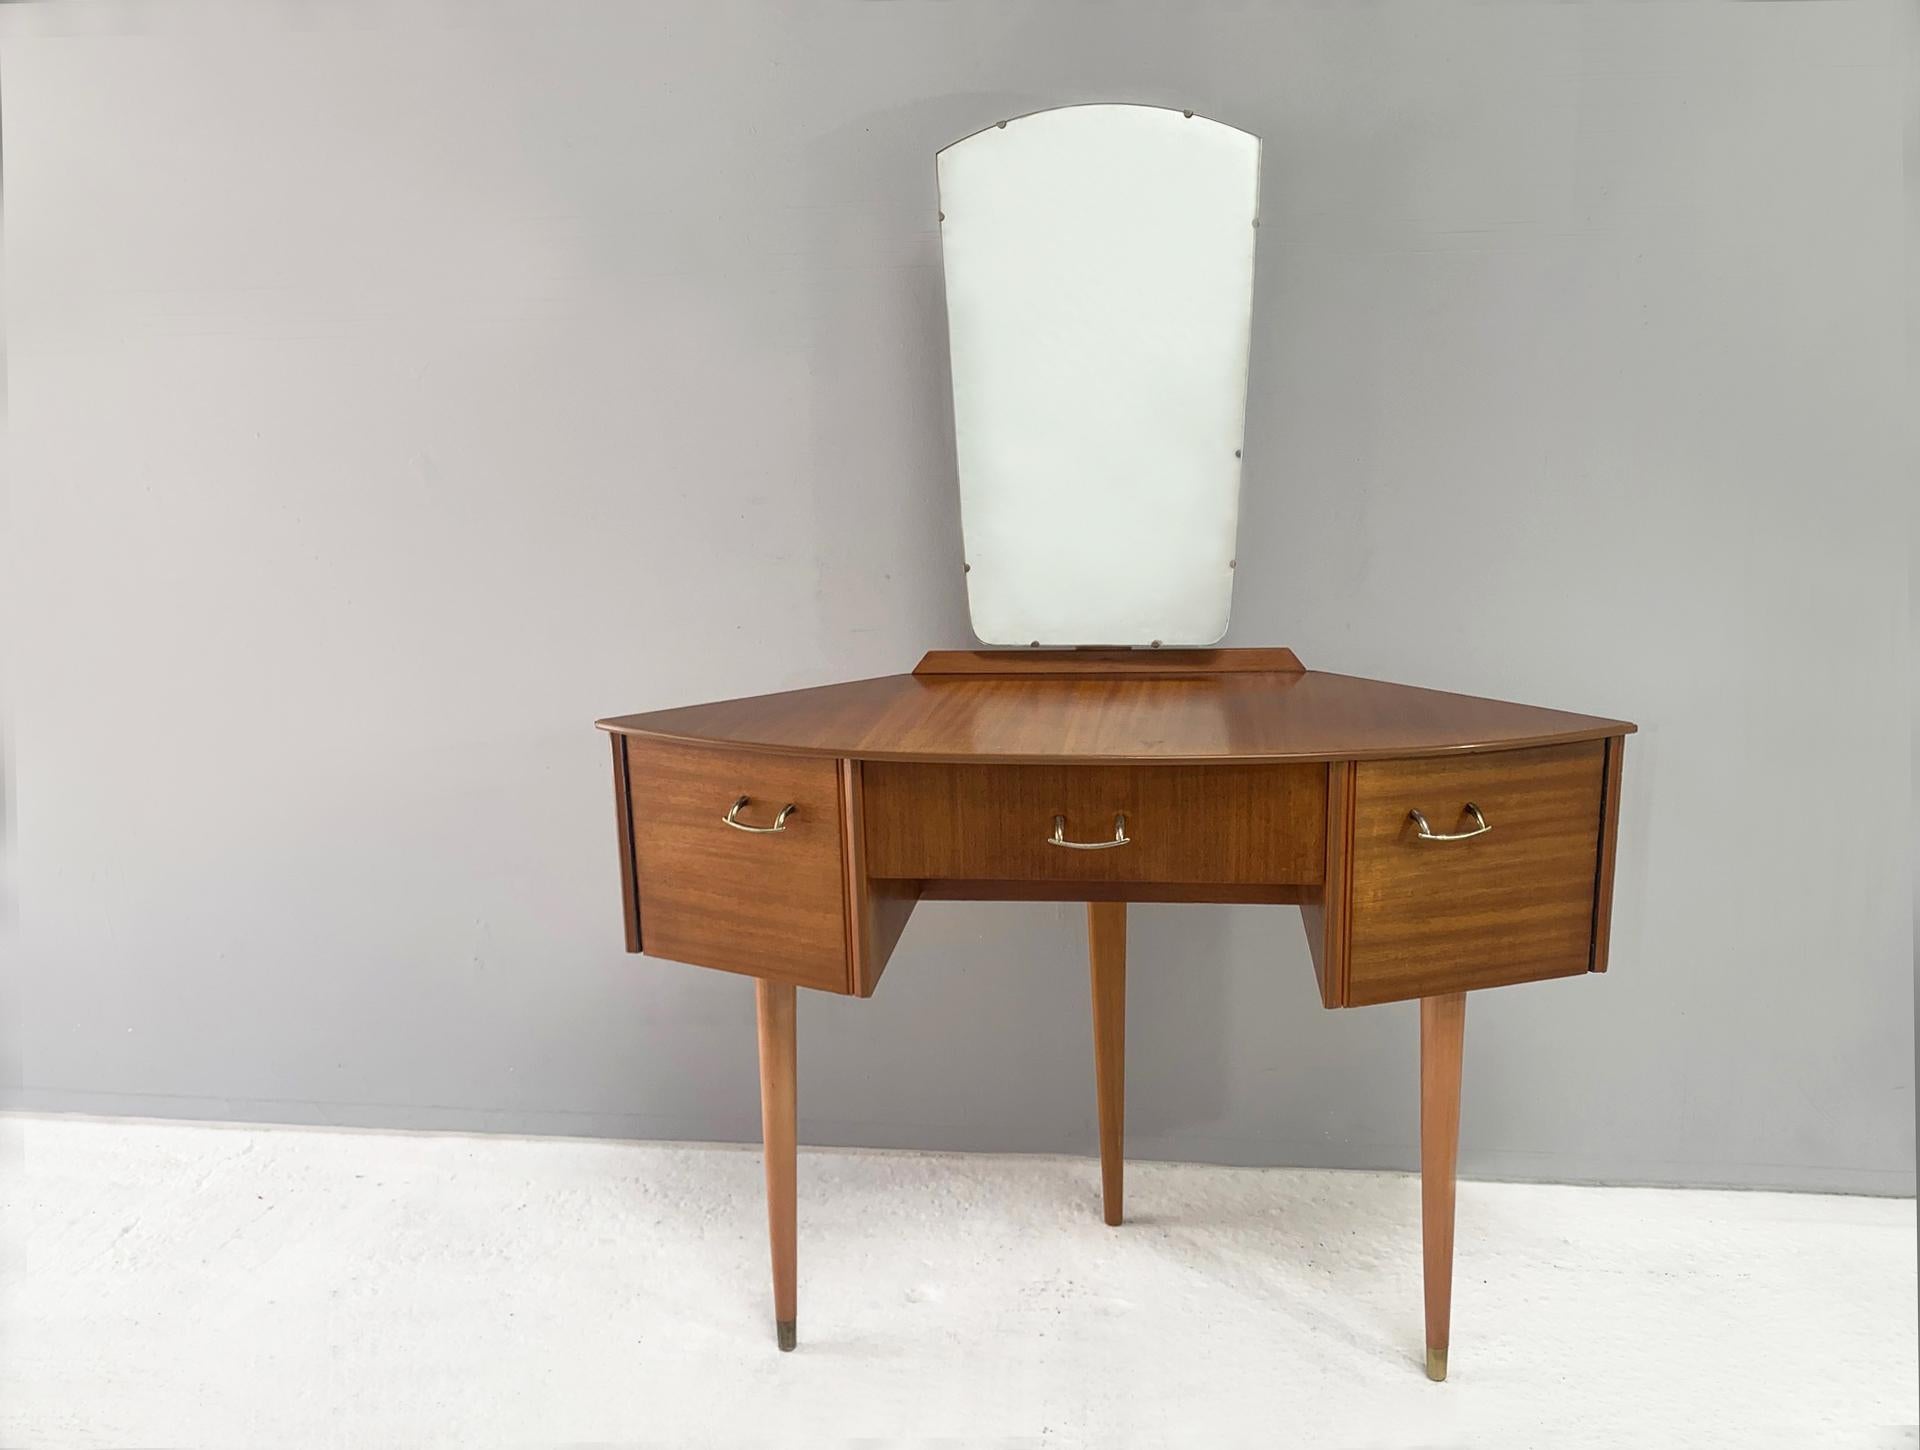 A very rare petite angular 3 leg dressing table by respected English maker Avalon. A distinctive V shape allows it to stand on just 3 legs. Walnut veneer throughout with brass handles and leg tips. Mirror is adjustable.

Size 
Overall height